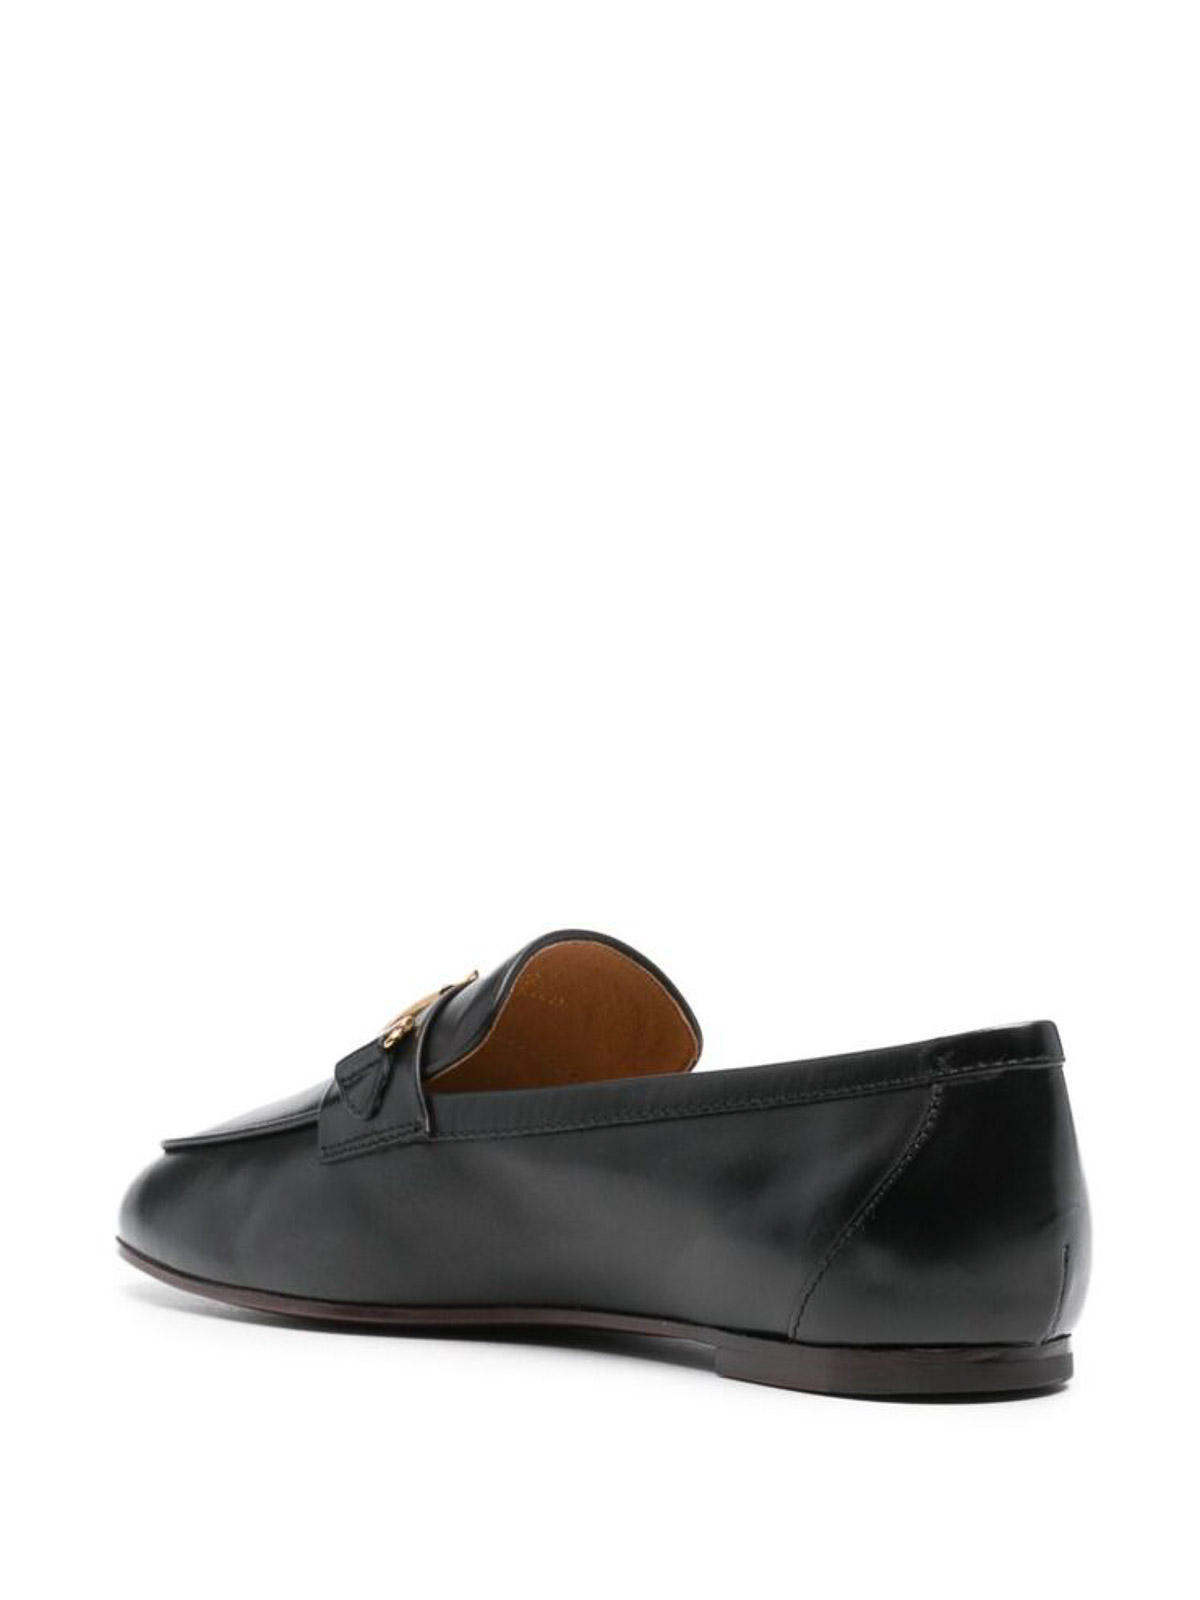 Shop Tod's Black Decorative Buckle Loafers